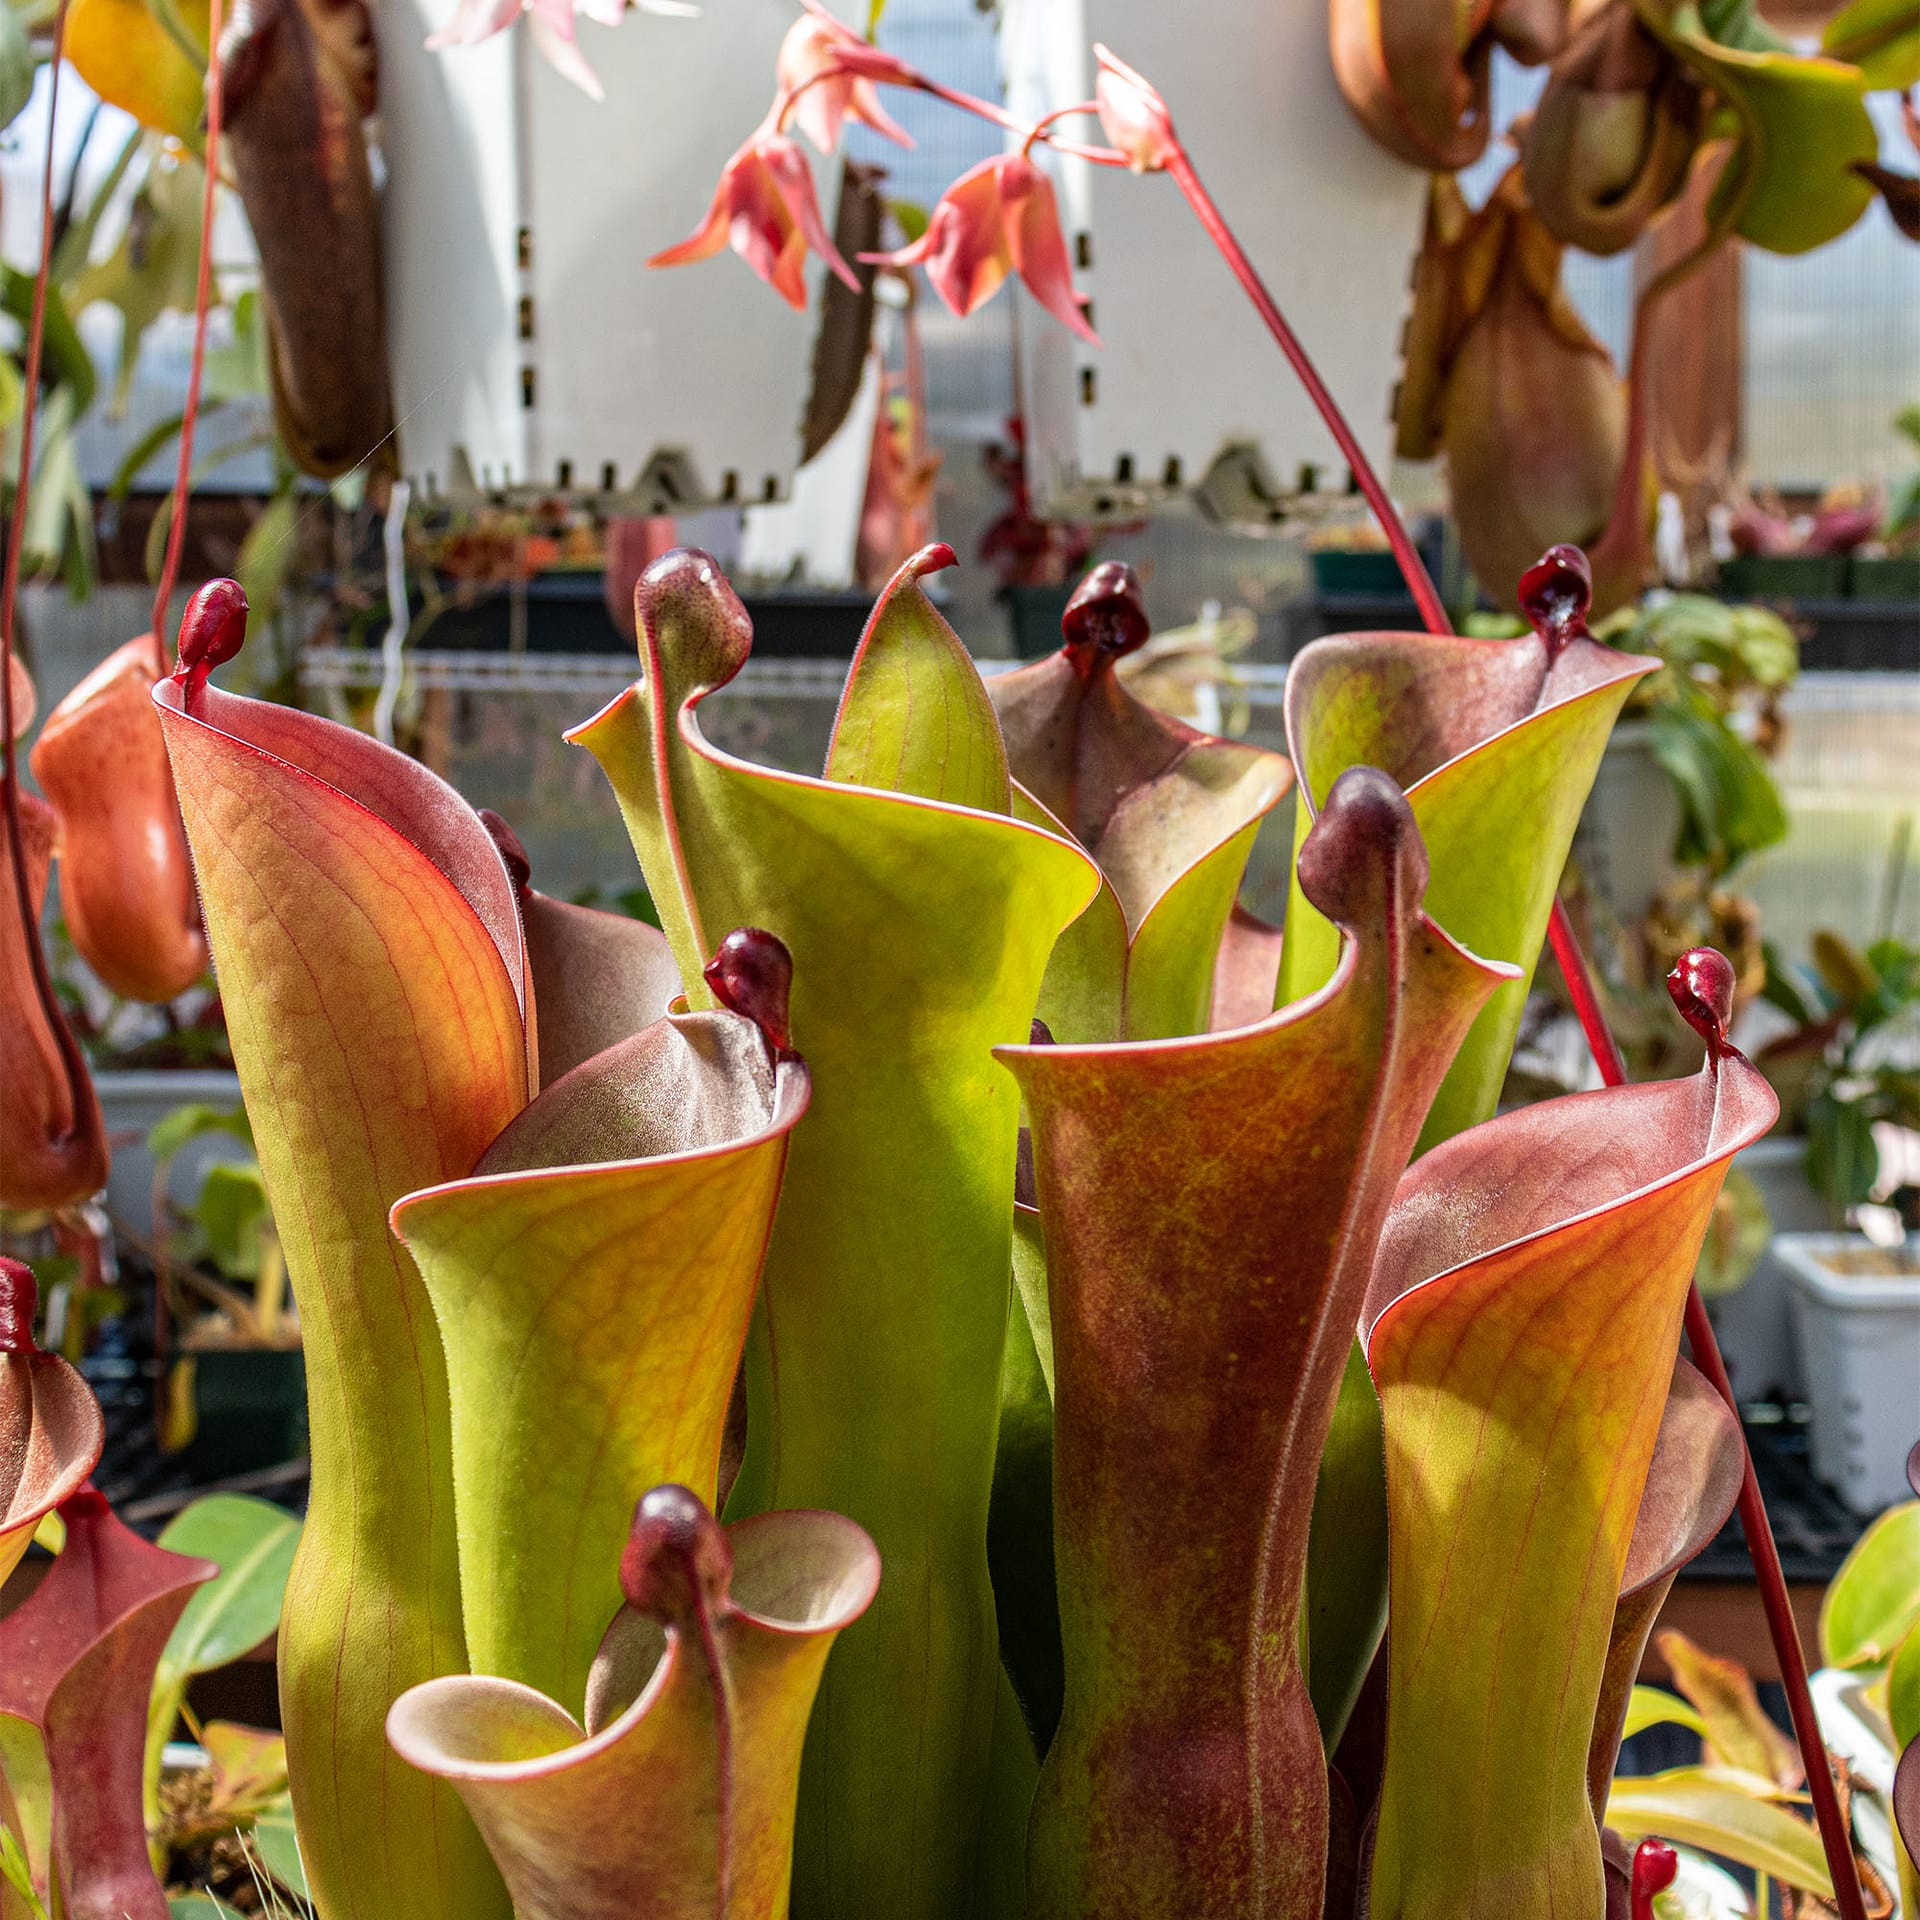 A close-up picture of a Heliamphora plant in a greenhouse